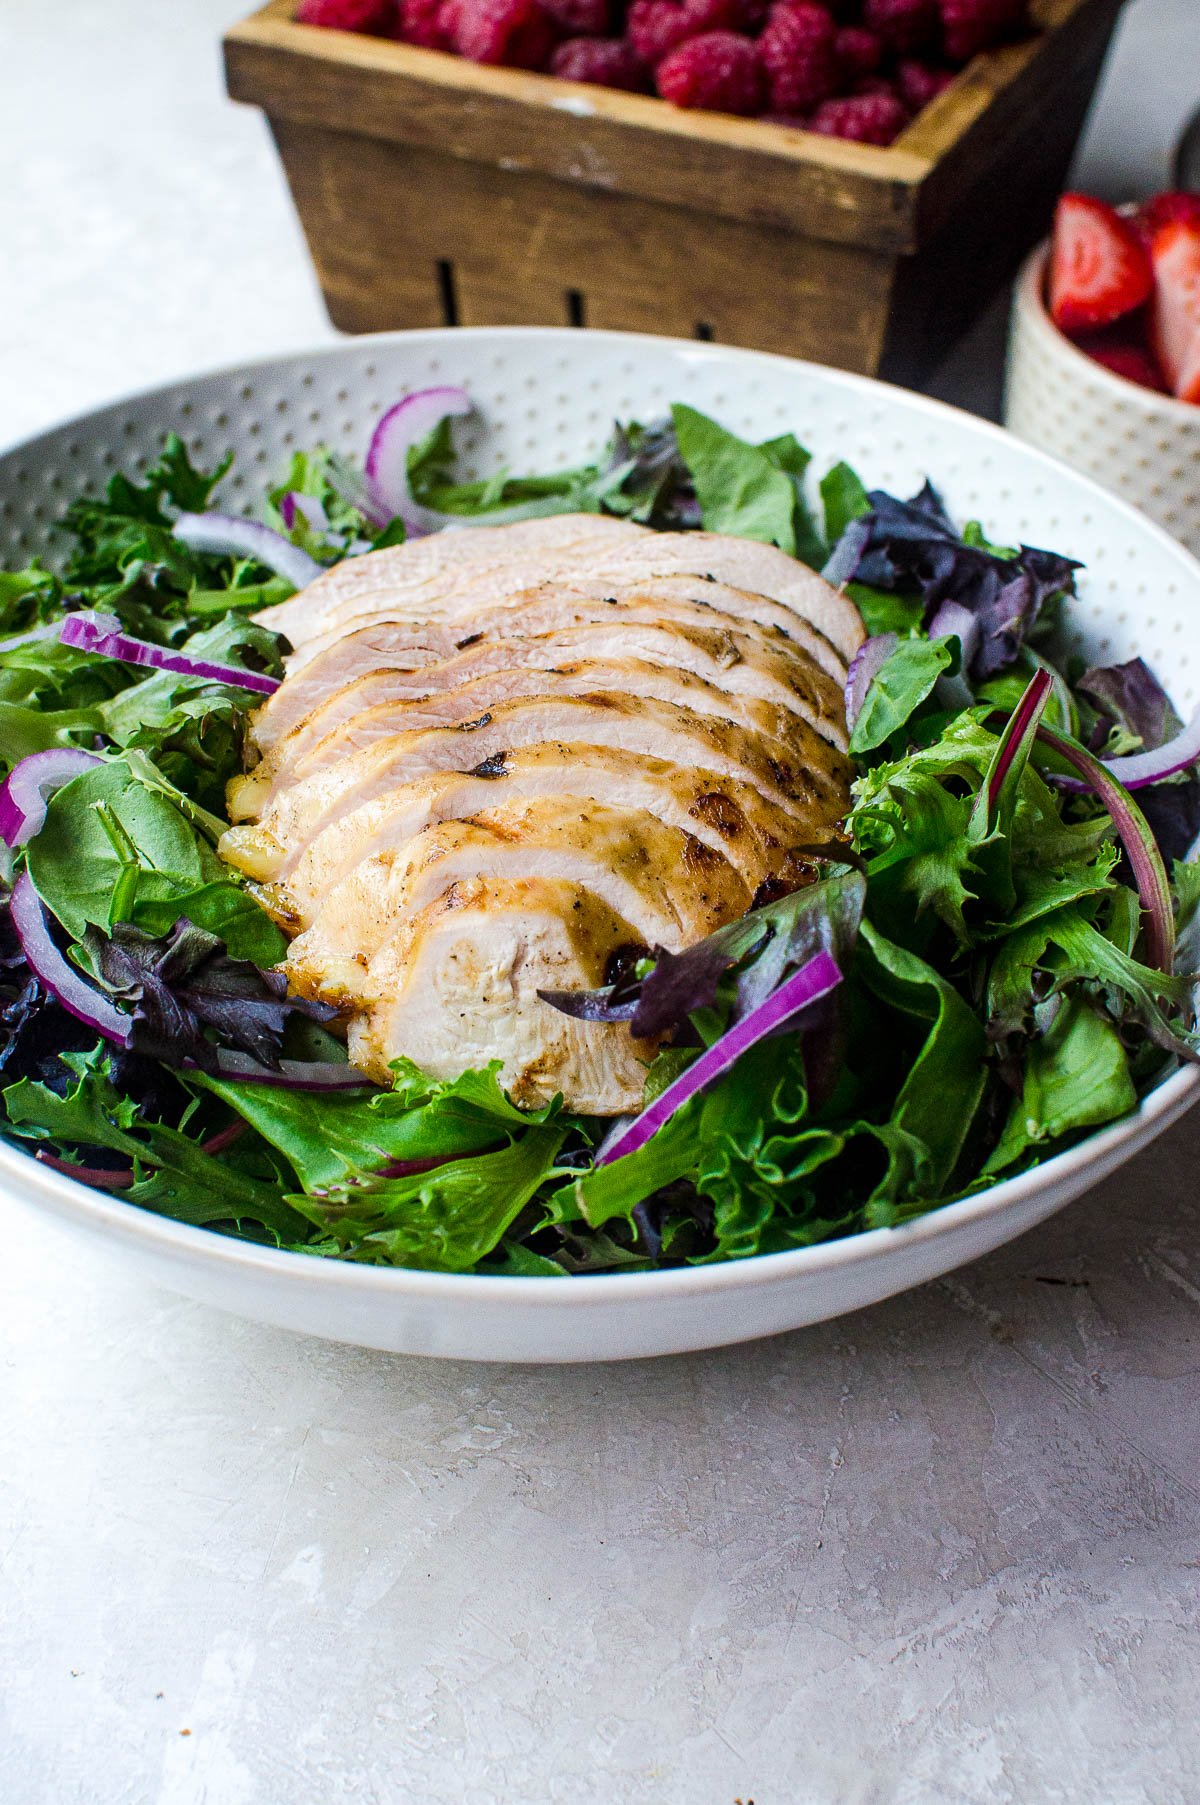 A bowl with salad greens and sliced grilled chicken.